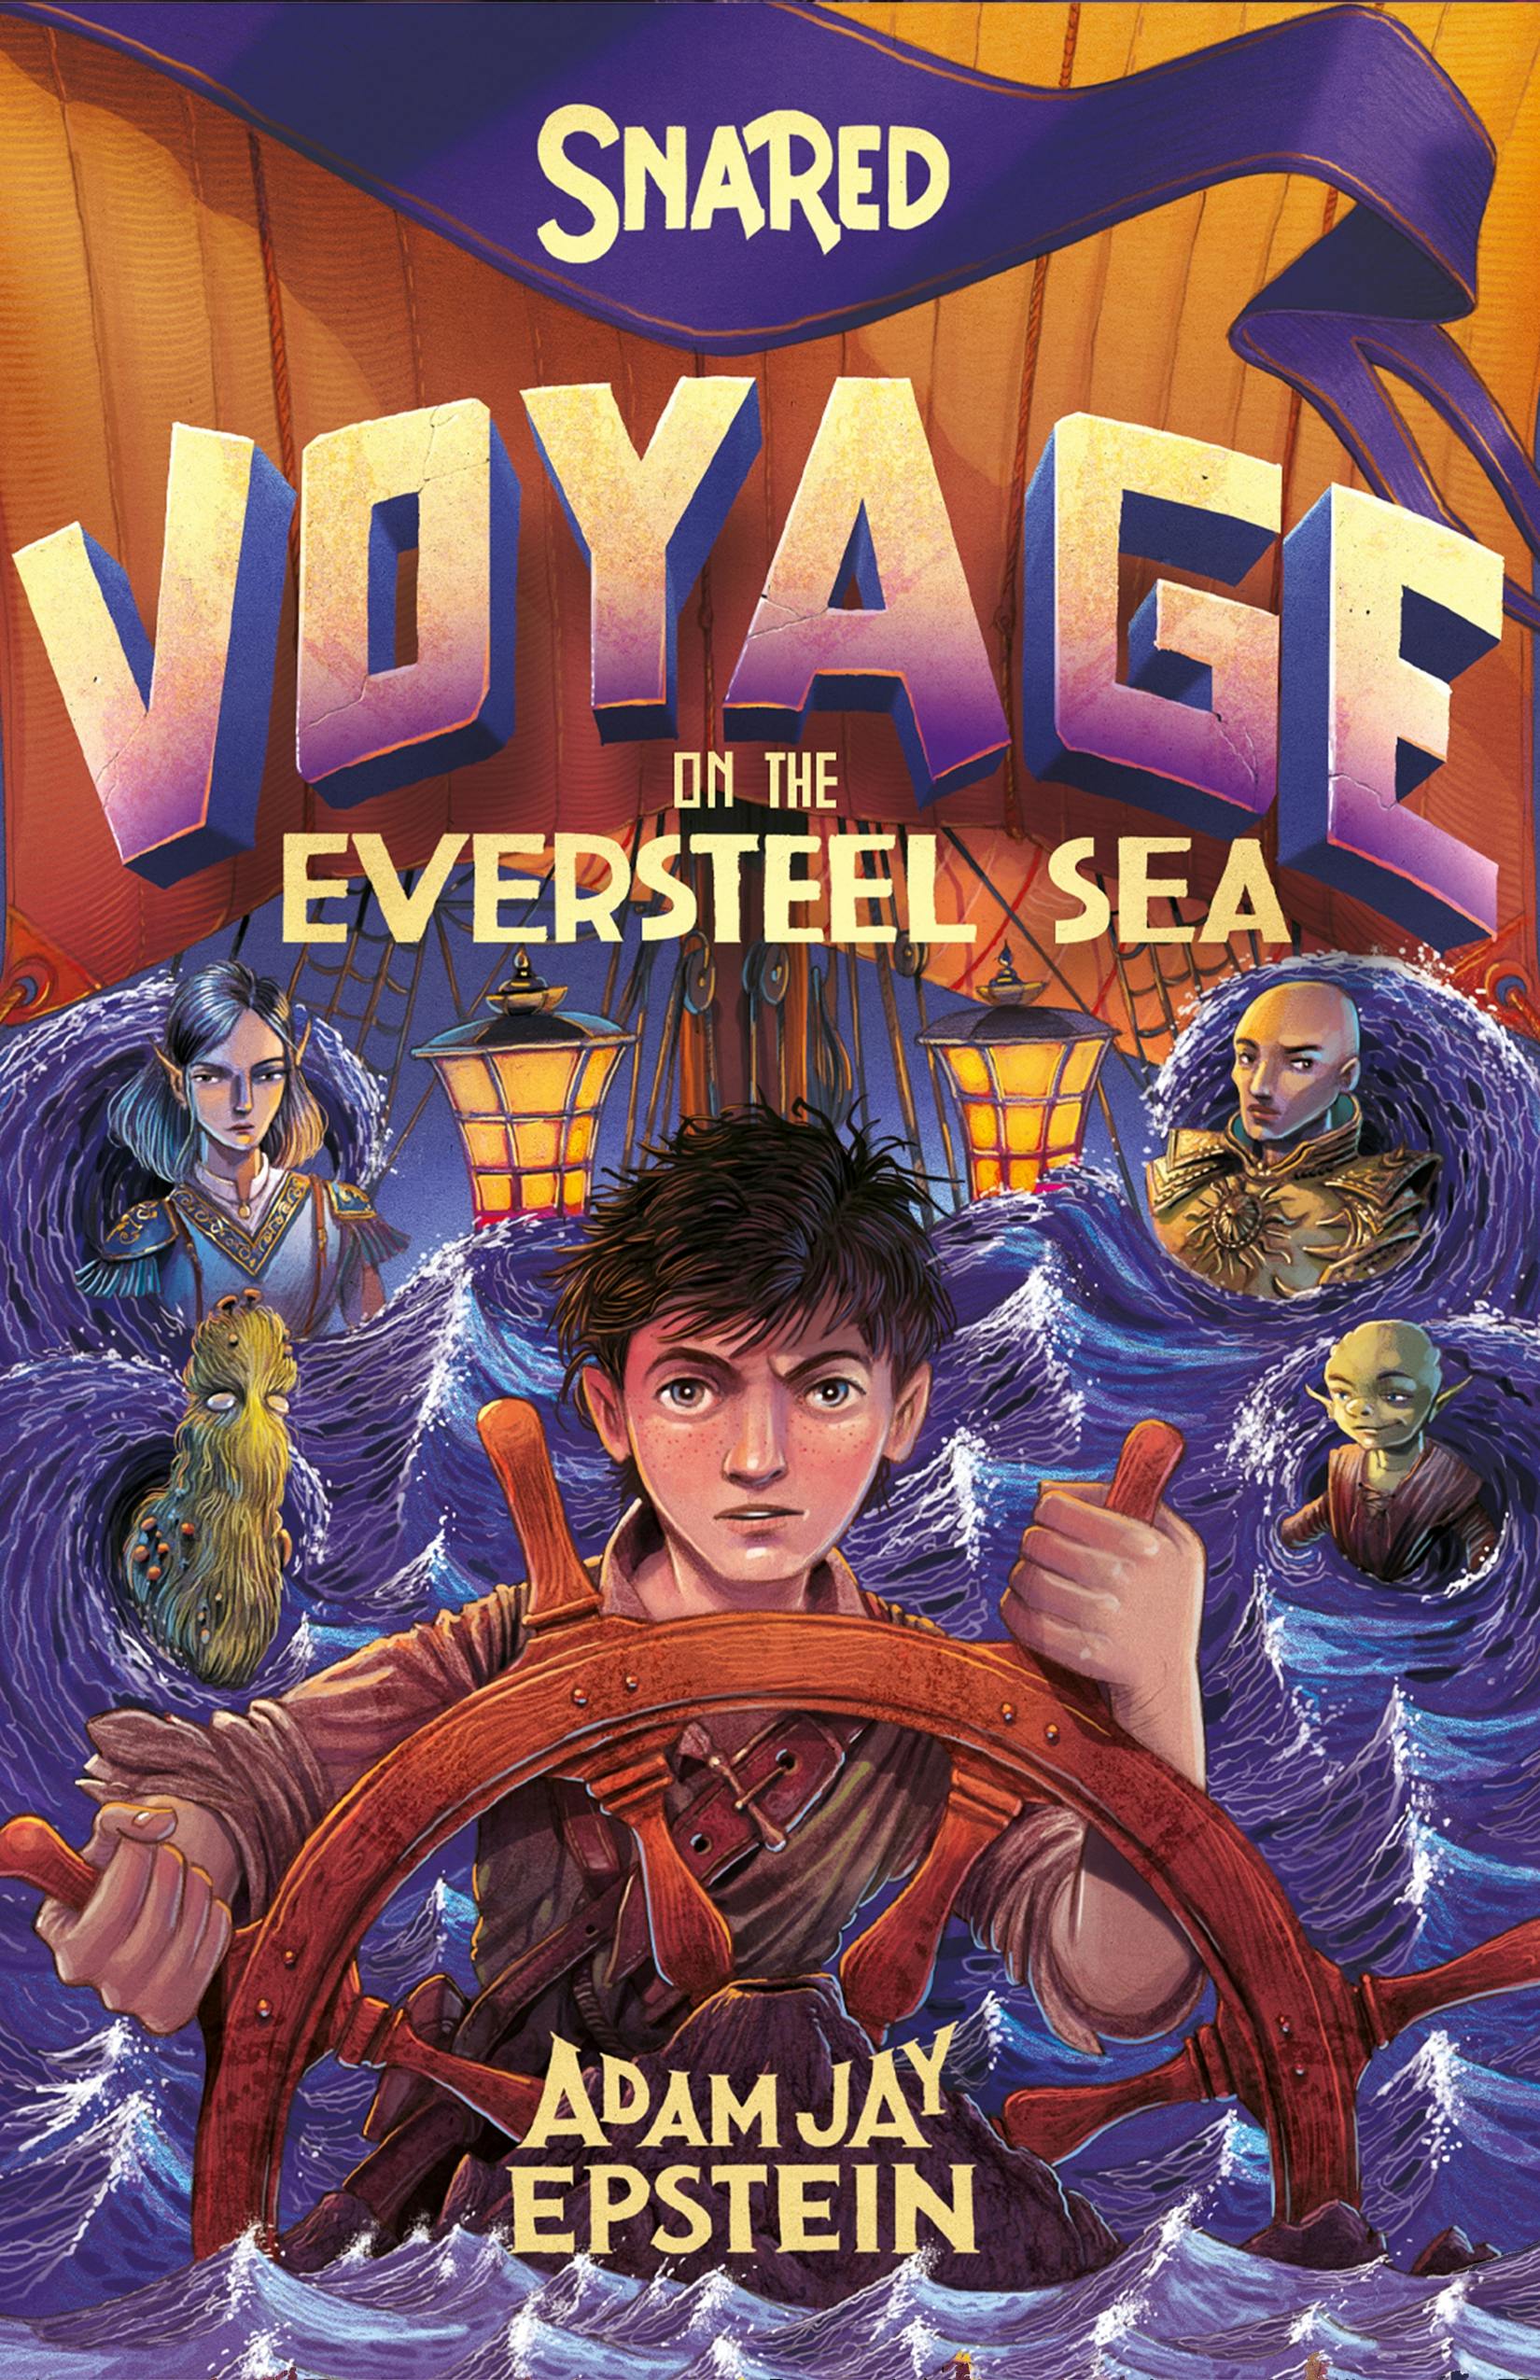 Image of Snared: Voyage on the Eversteel Sea